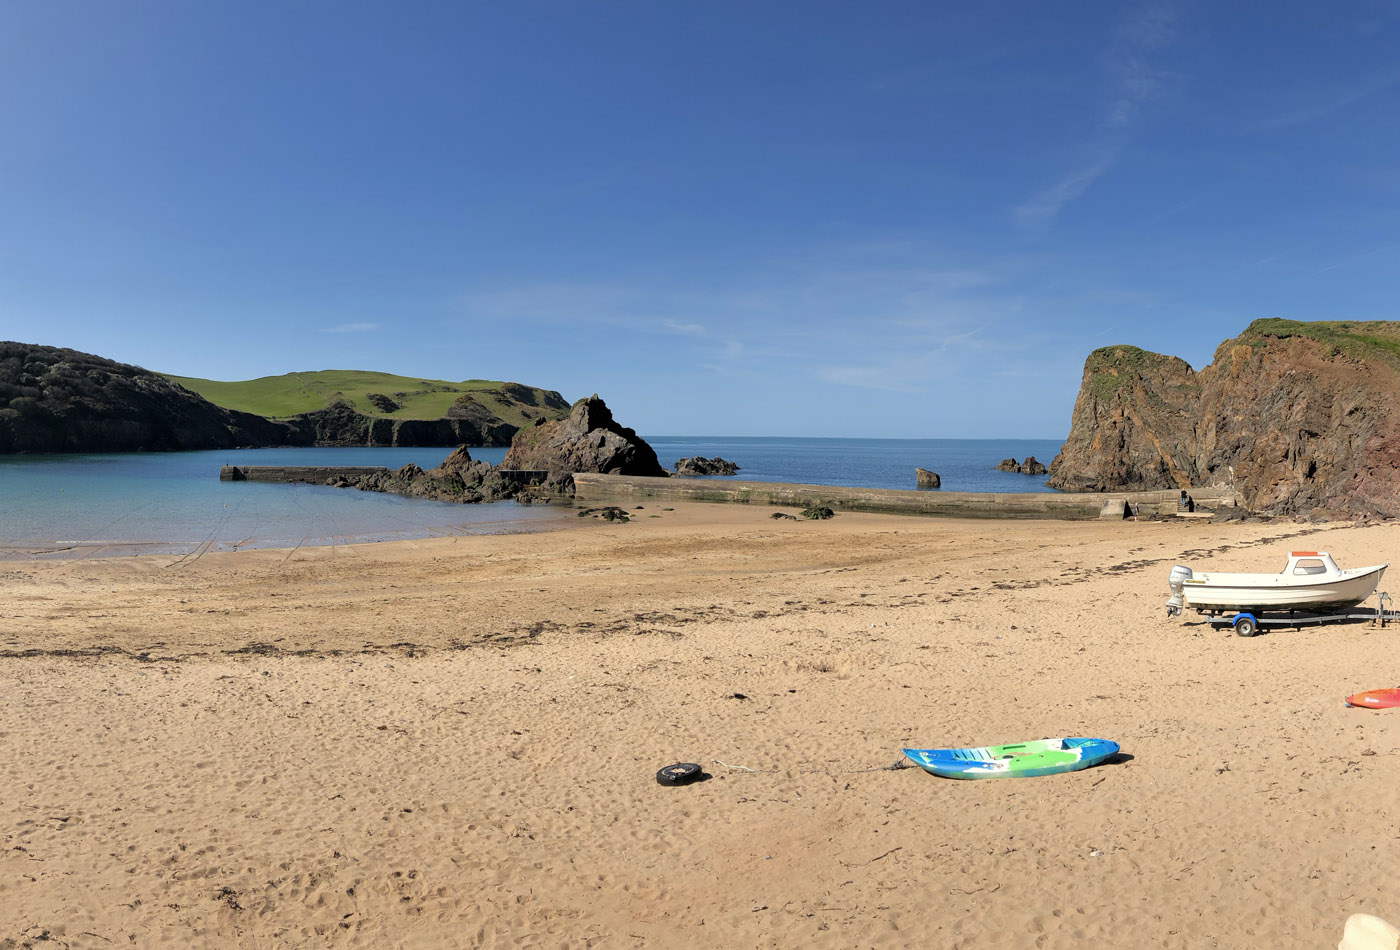 Harbour Beach - Hope Cove beaches feature image